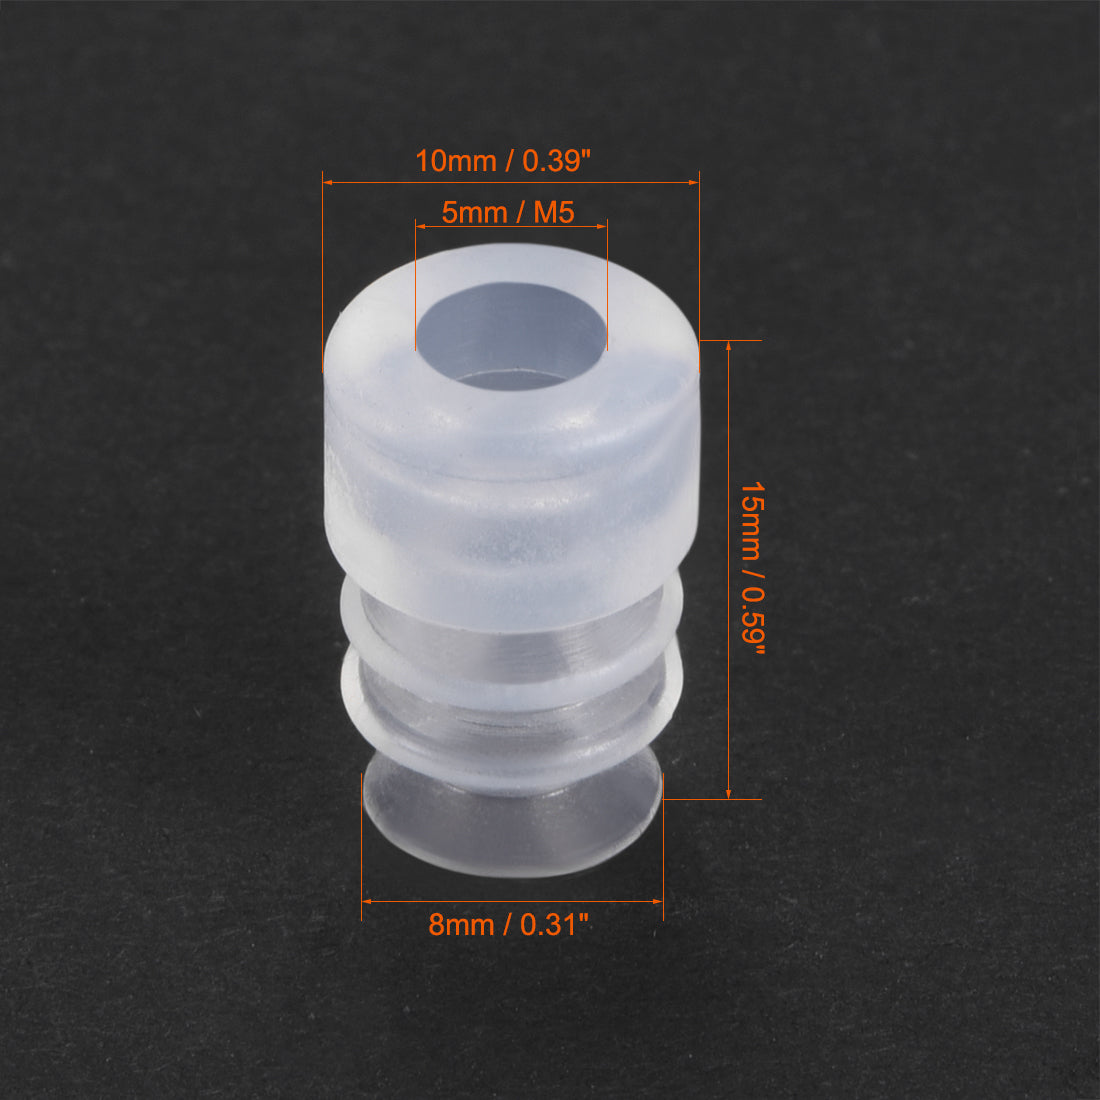 uxcell Uxcell Clear White Soft Silicone Waterproof Vacuum Suction Cup 8mmx5mm Bellows Suction Cup,4pcs